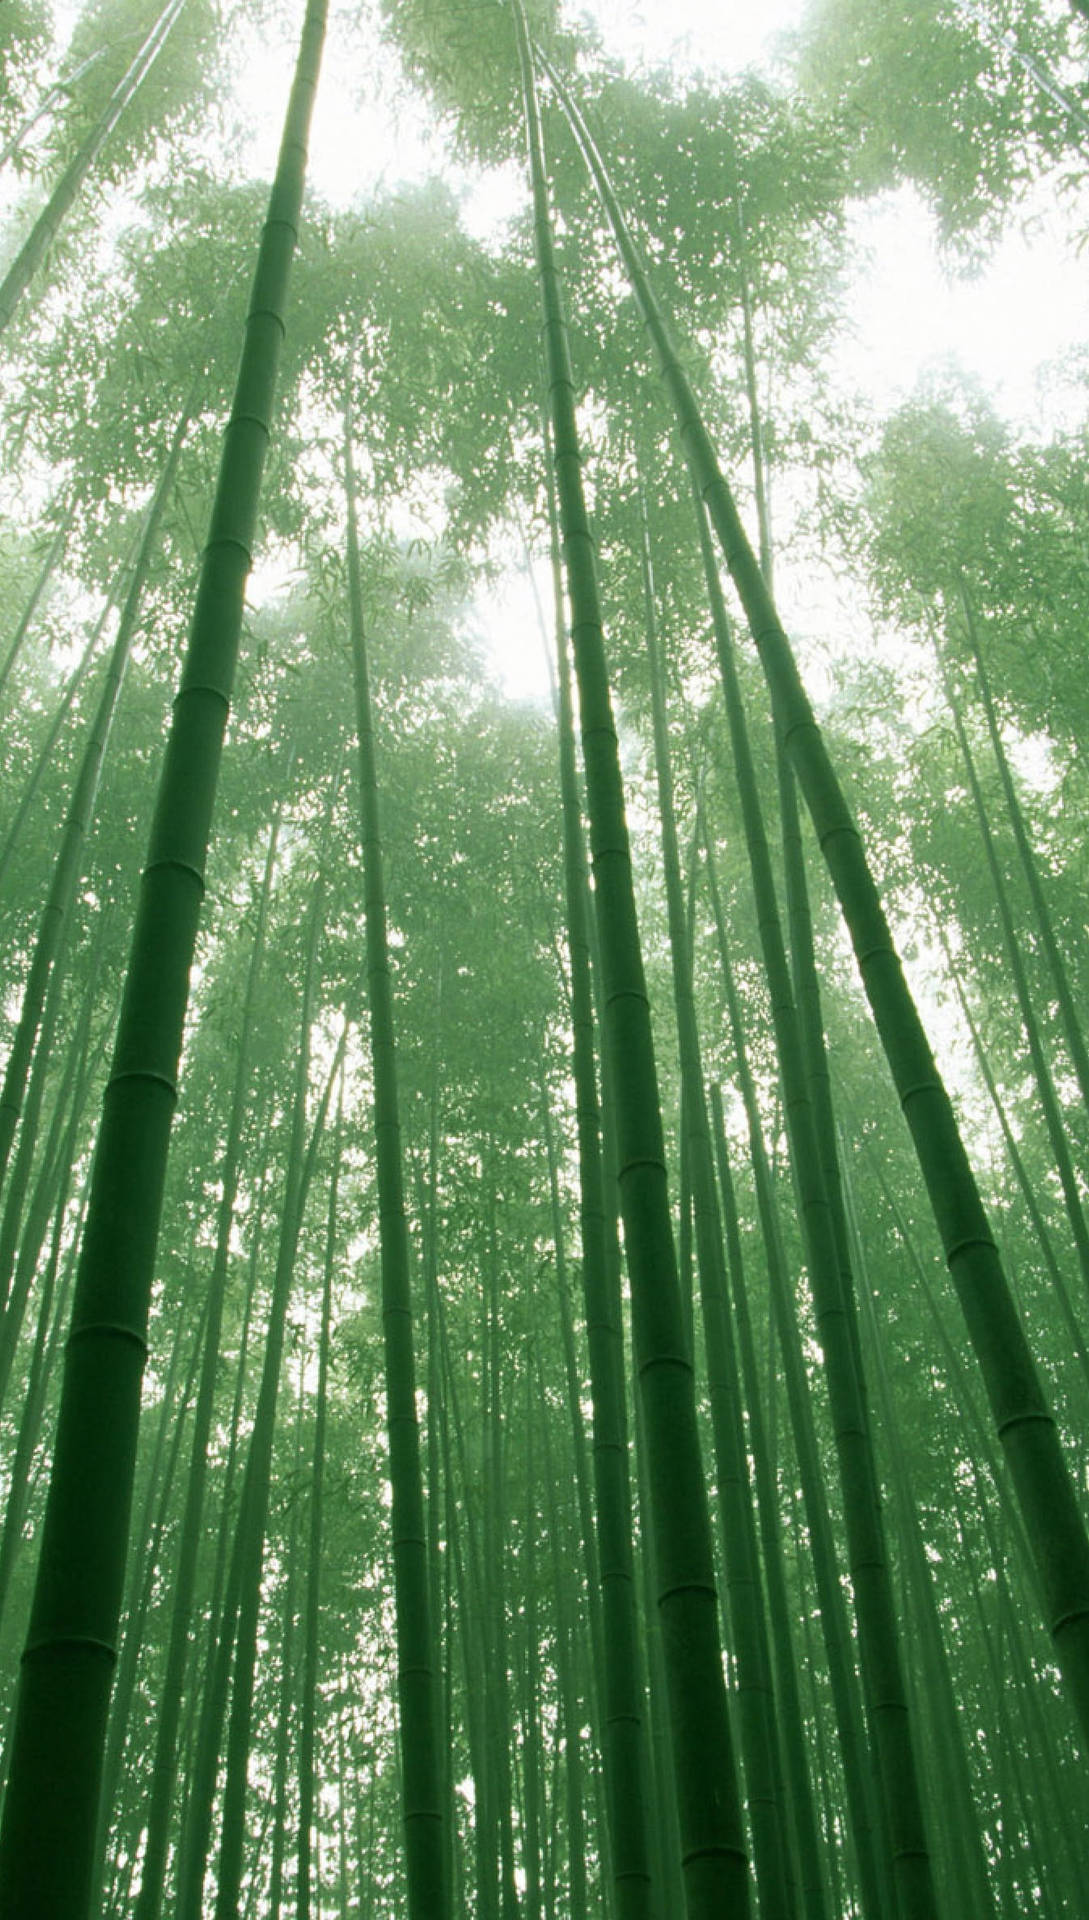 Tall Bamboo Forest Iphone